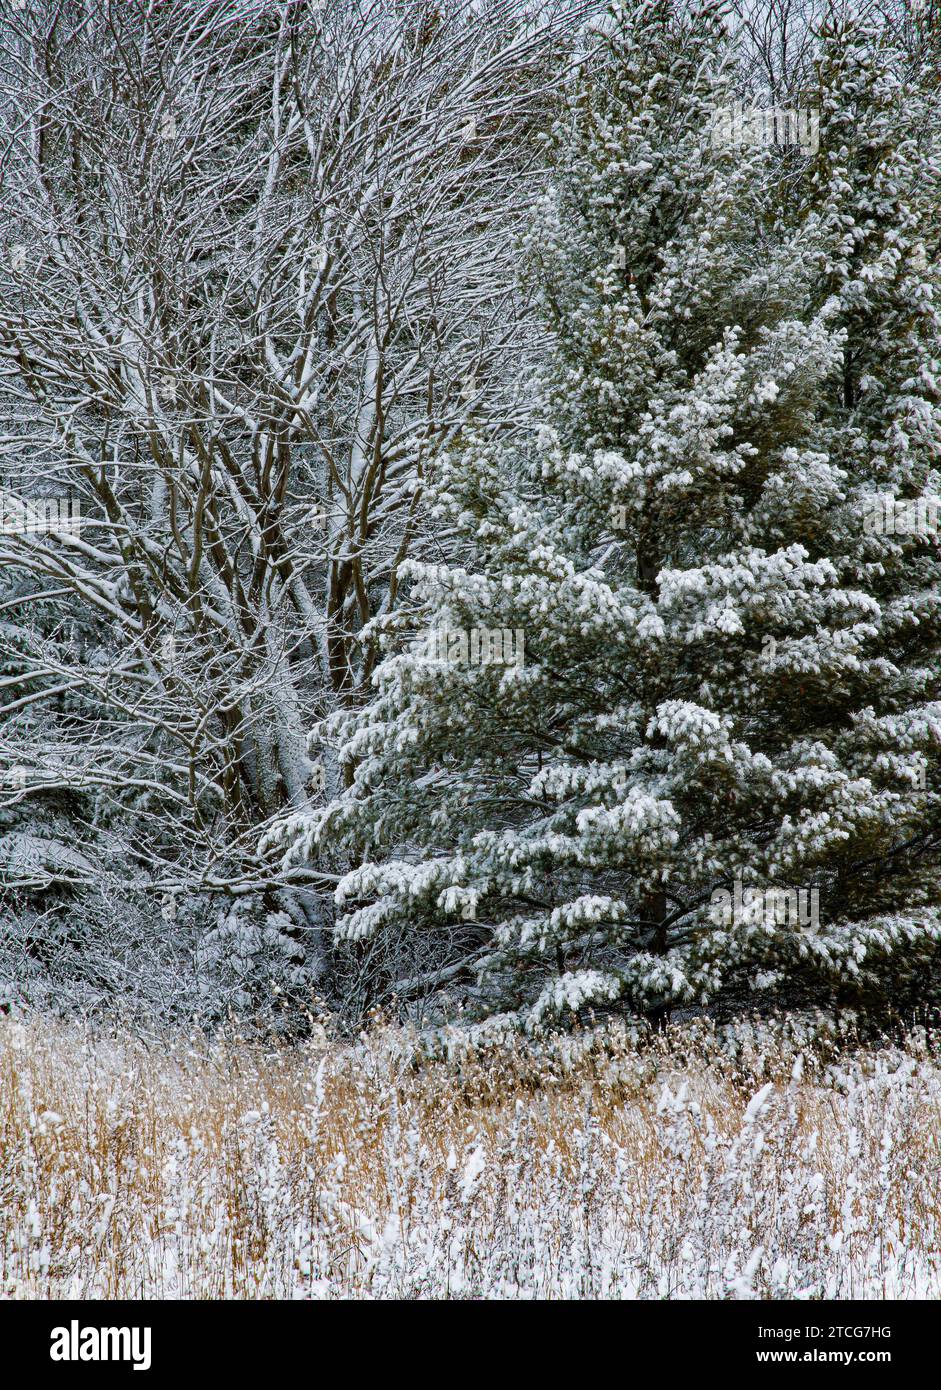 A Blue Spruce (Picea pungens)  along with the rest of the forest edhge and grasses are dusted with fresh snow, Newport State Park, Door County, Wiscon Stock Photo